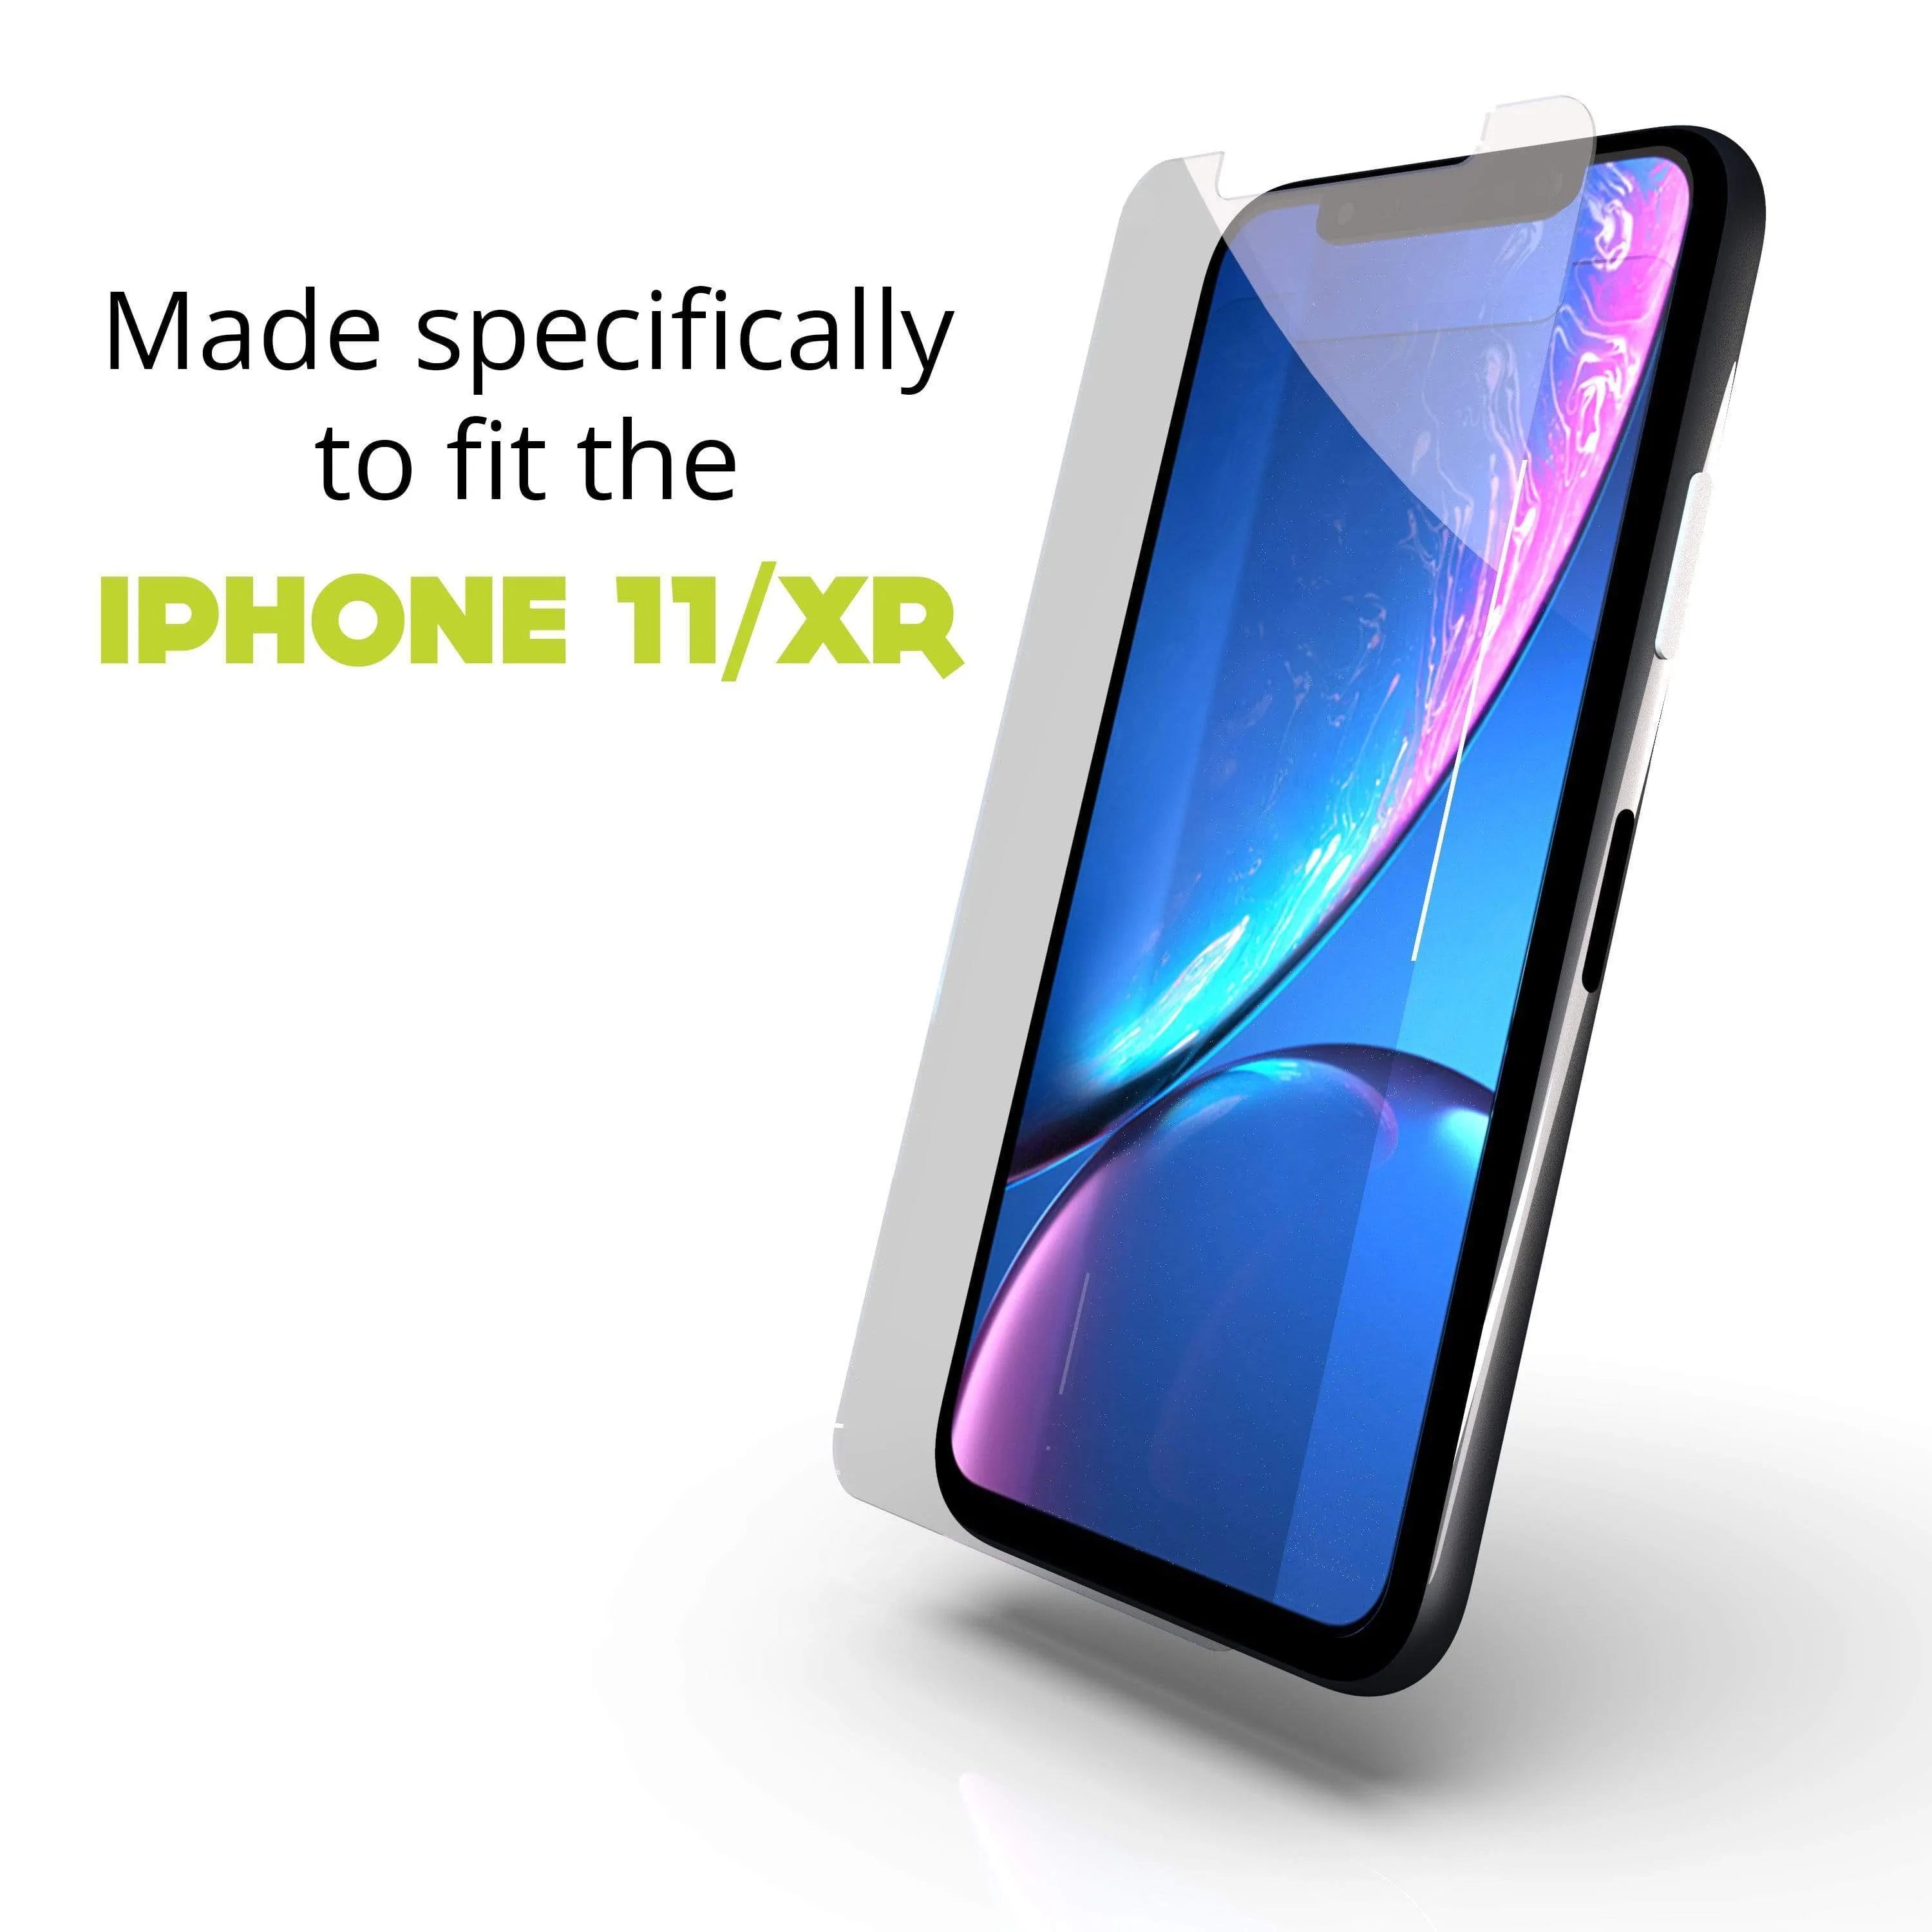 Fortress iPhone XR Screen Protector - $200 Device Coverage  Scooch Screen Protector